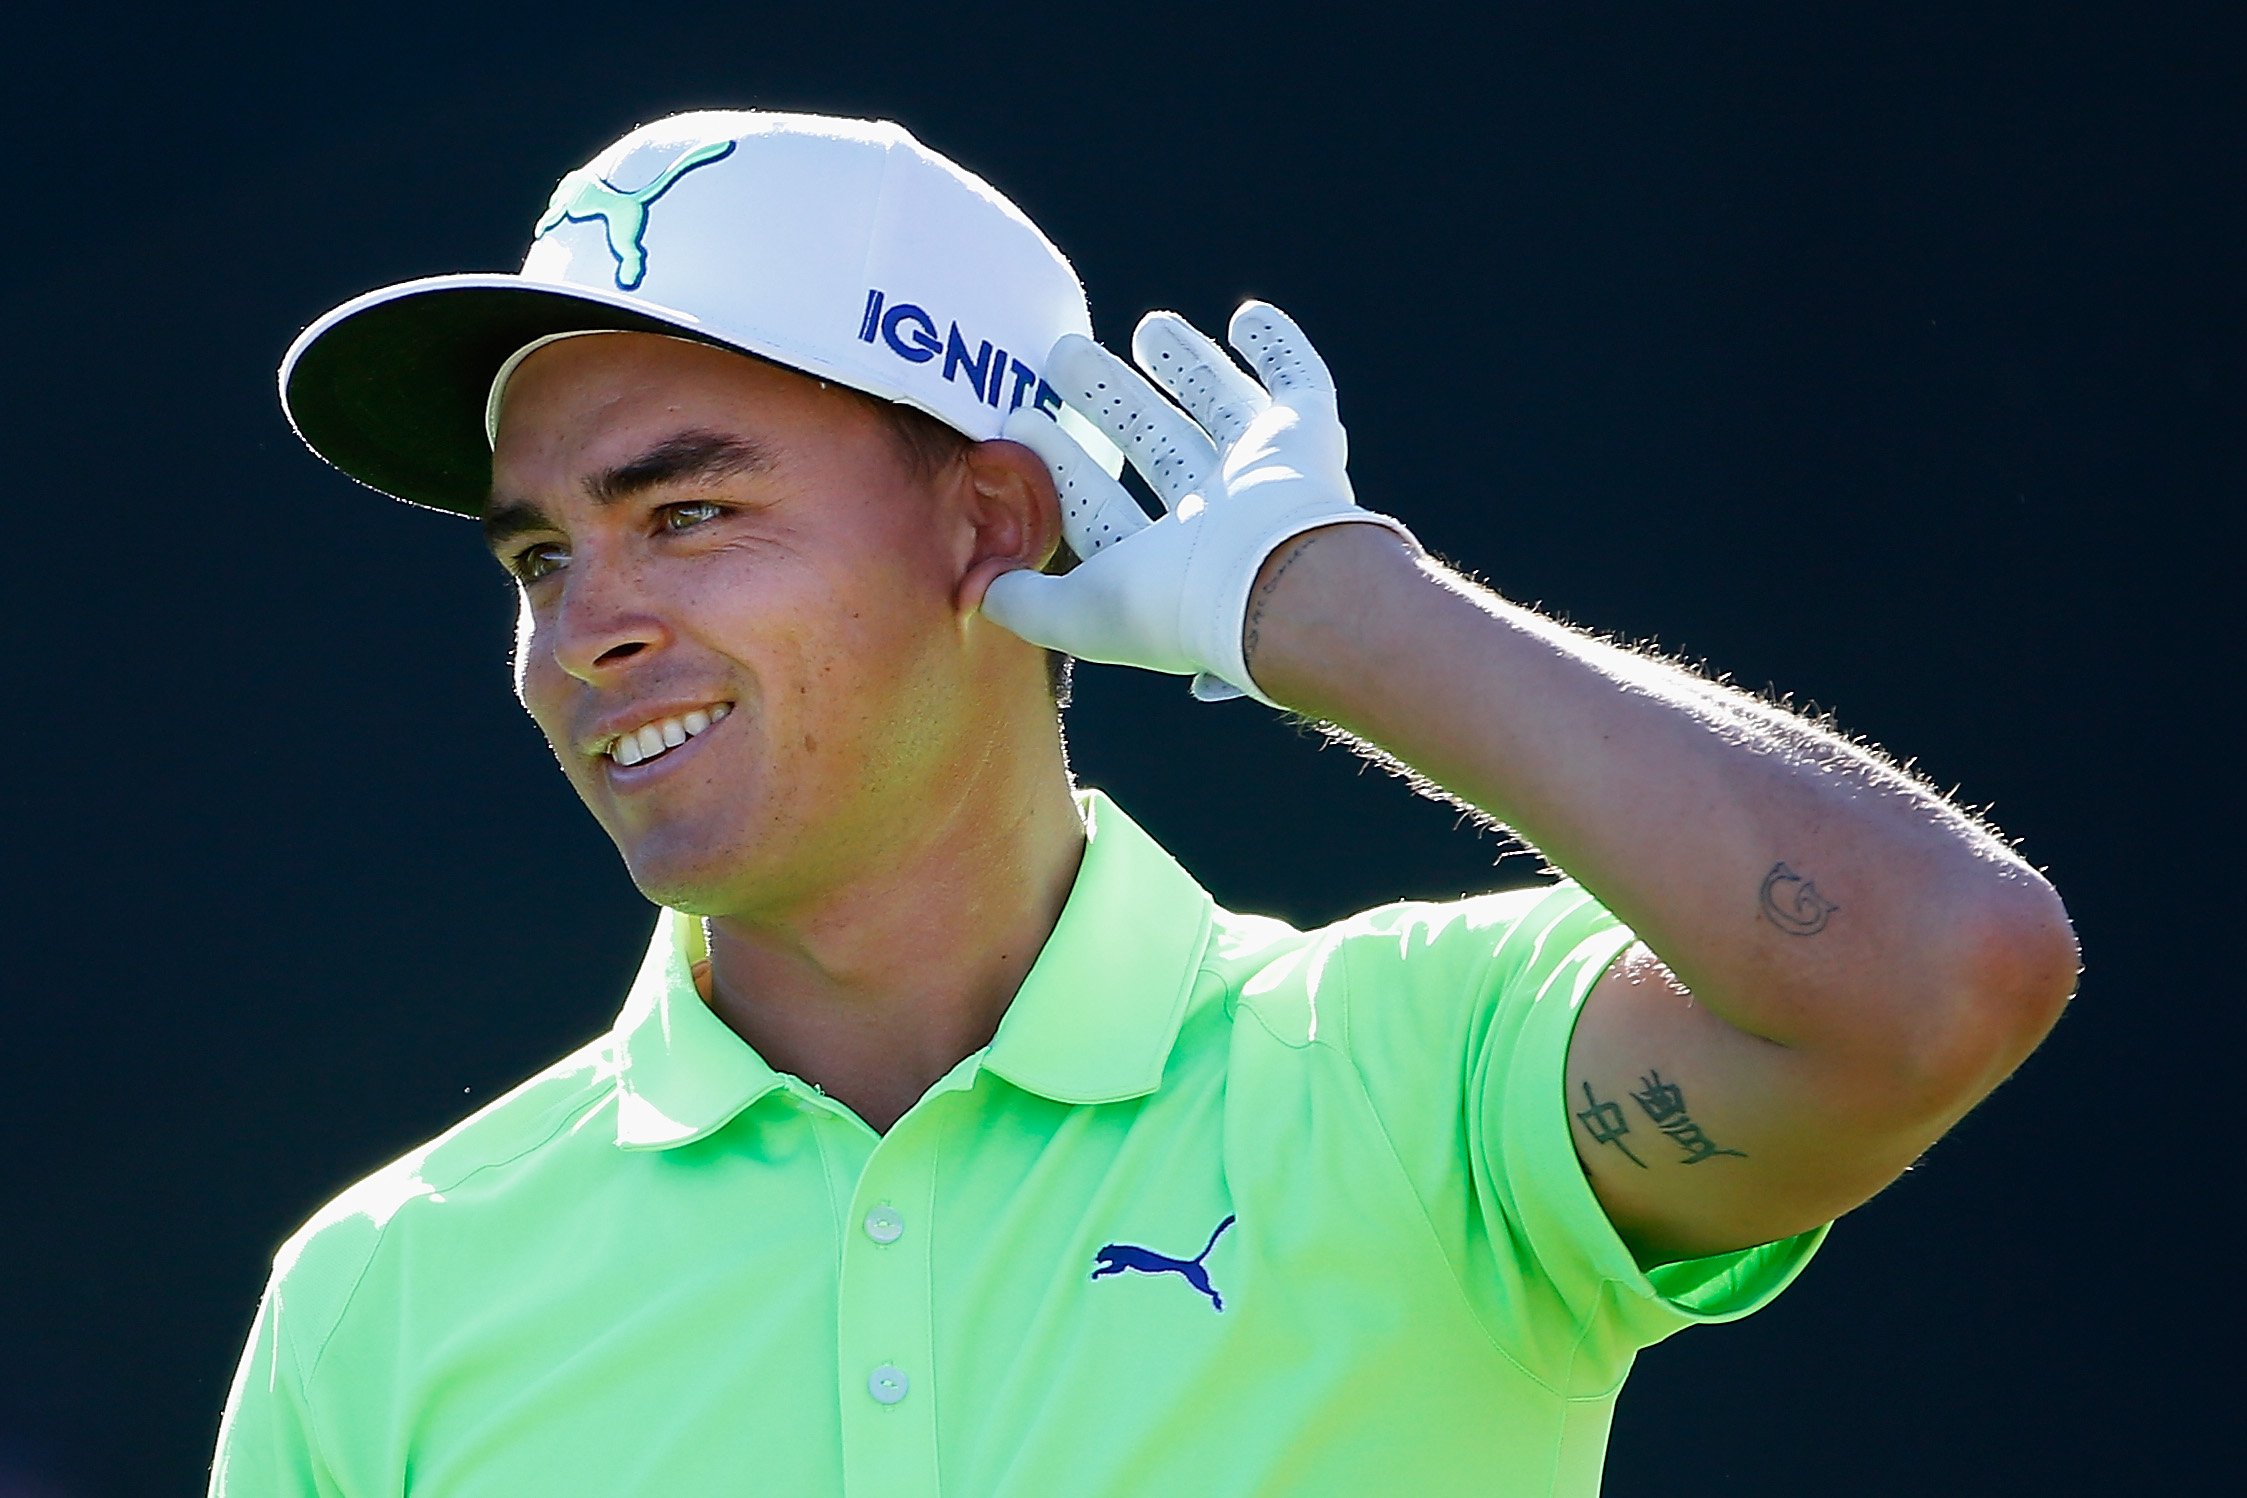 Rickie Fowler wearing green polo shirt and white cap